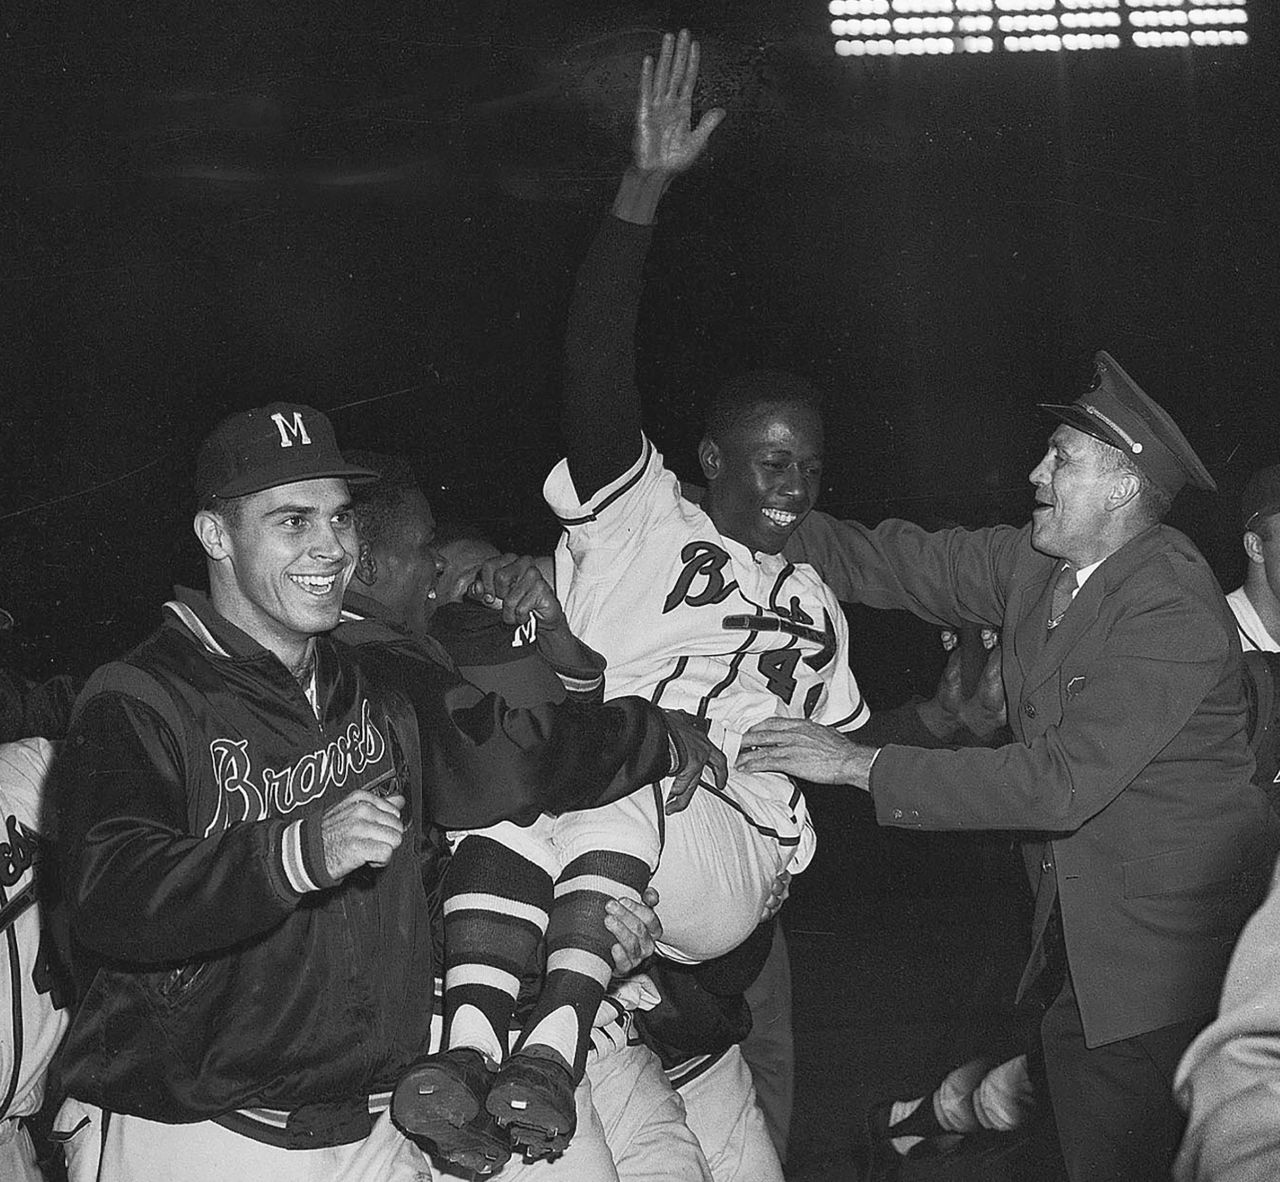 Aaron is carried off the field by his teammates after Milwaukee won the National League pennant in 1957.